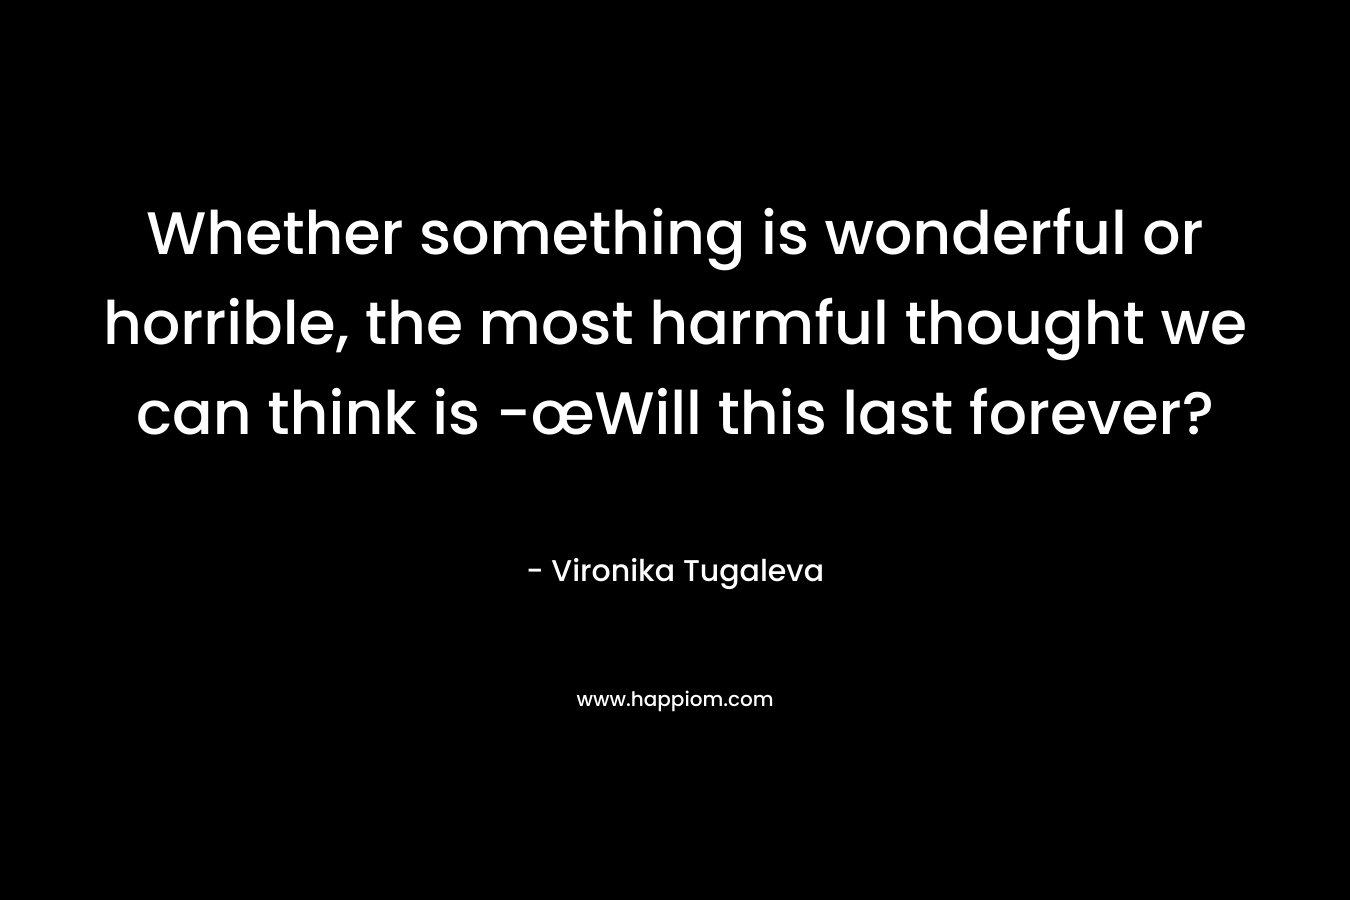 Whether something is wonderful or horrible, the most harmful thought we can think is -œWill this last forever?